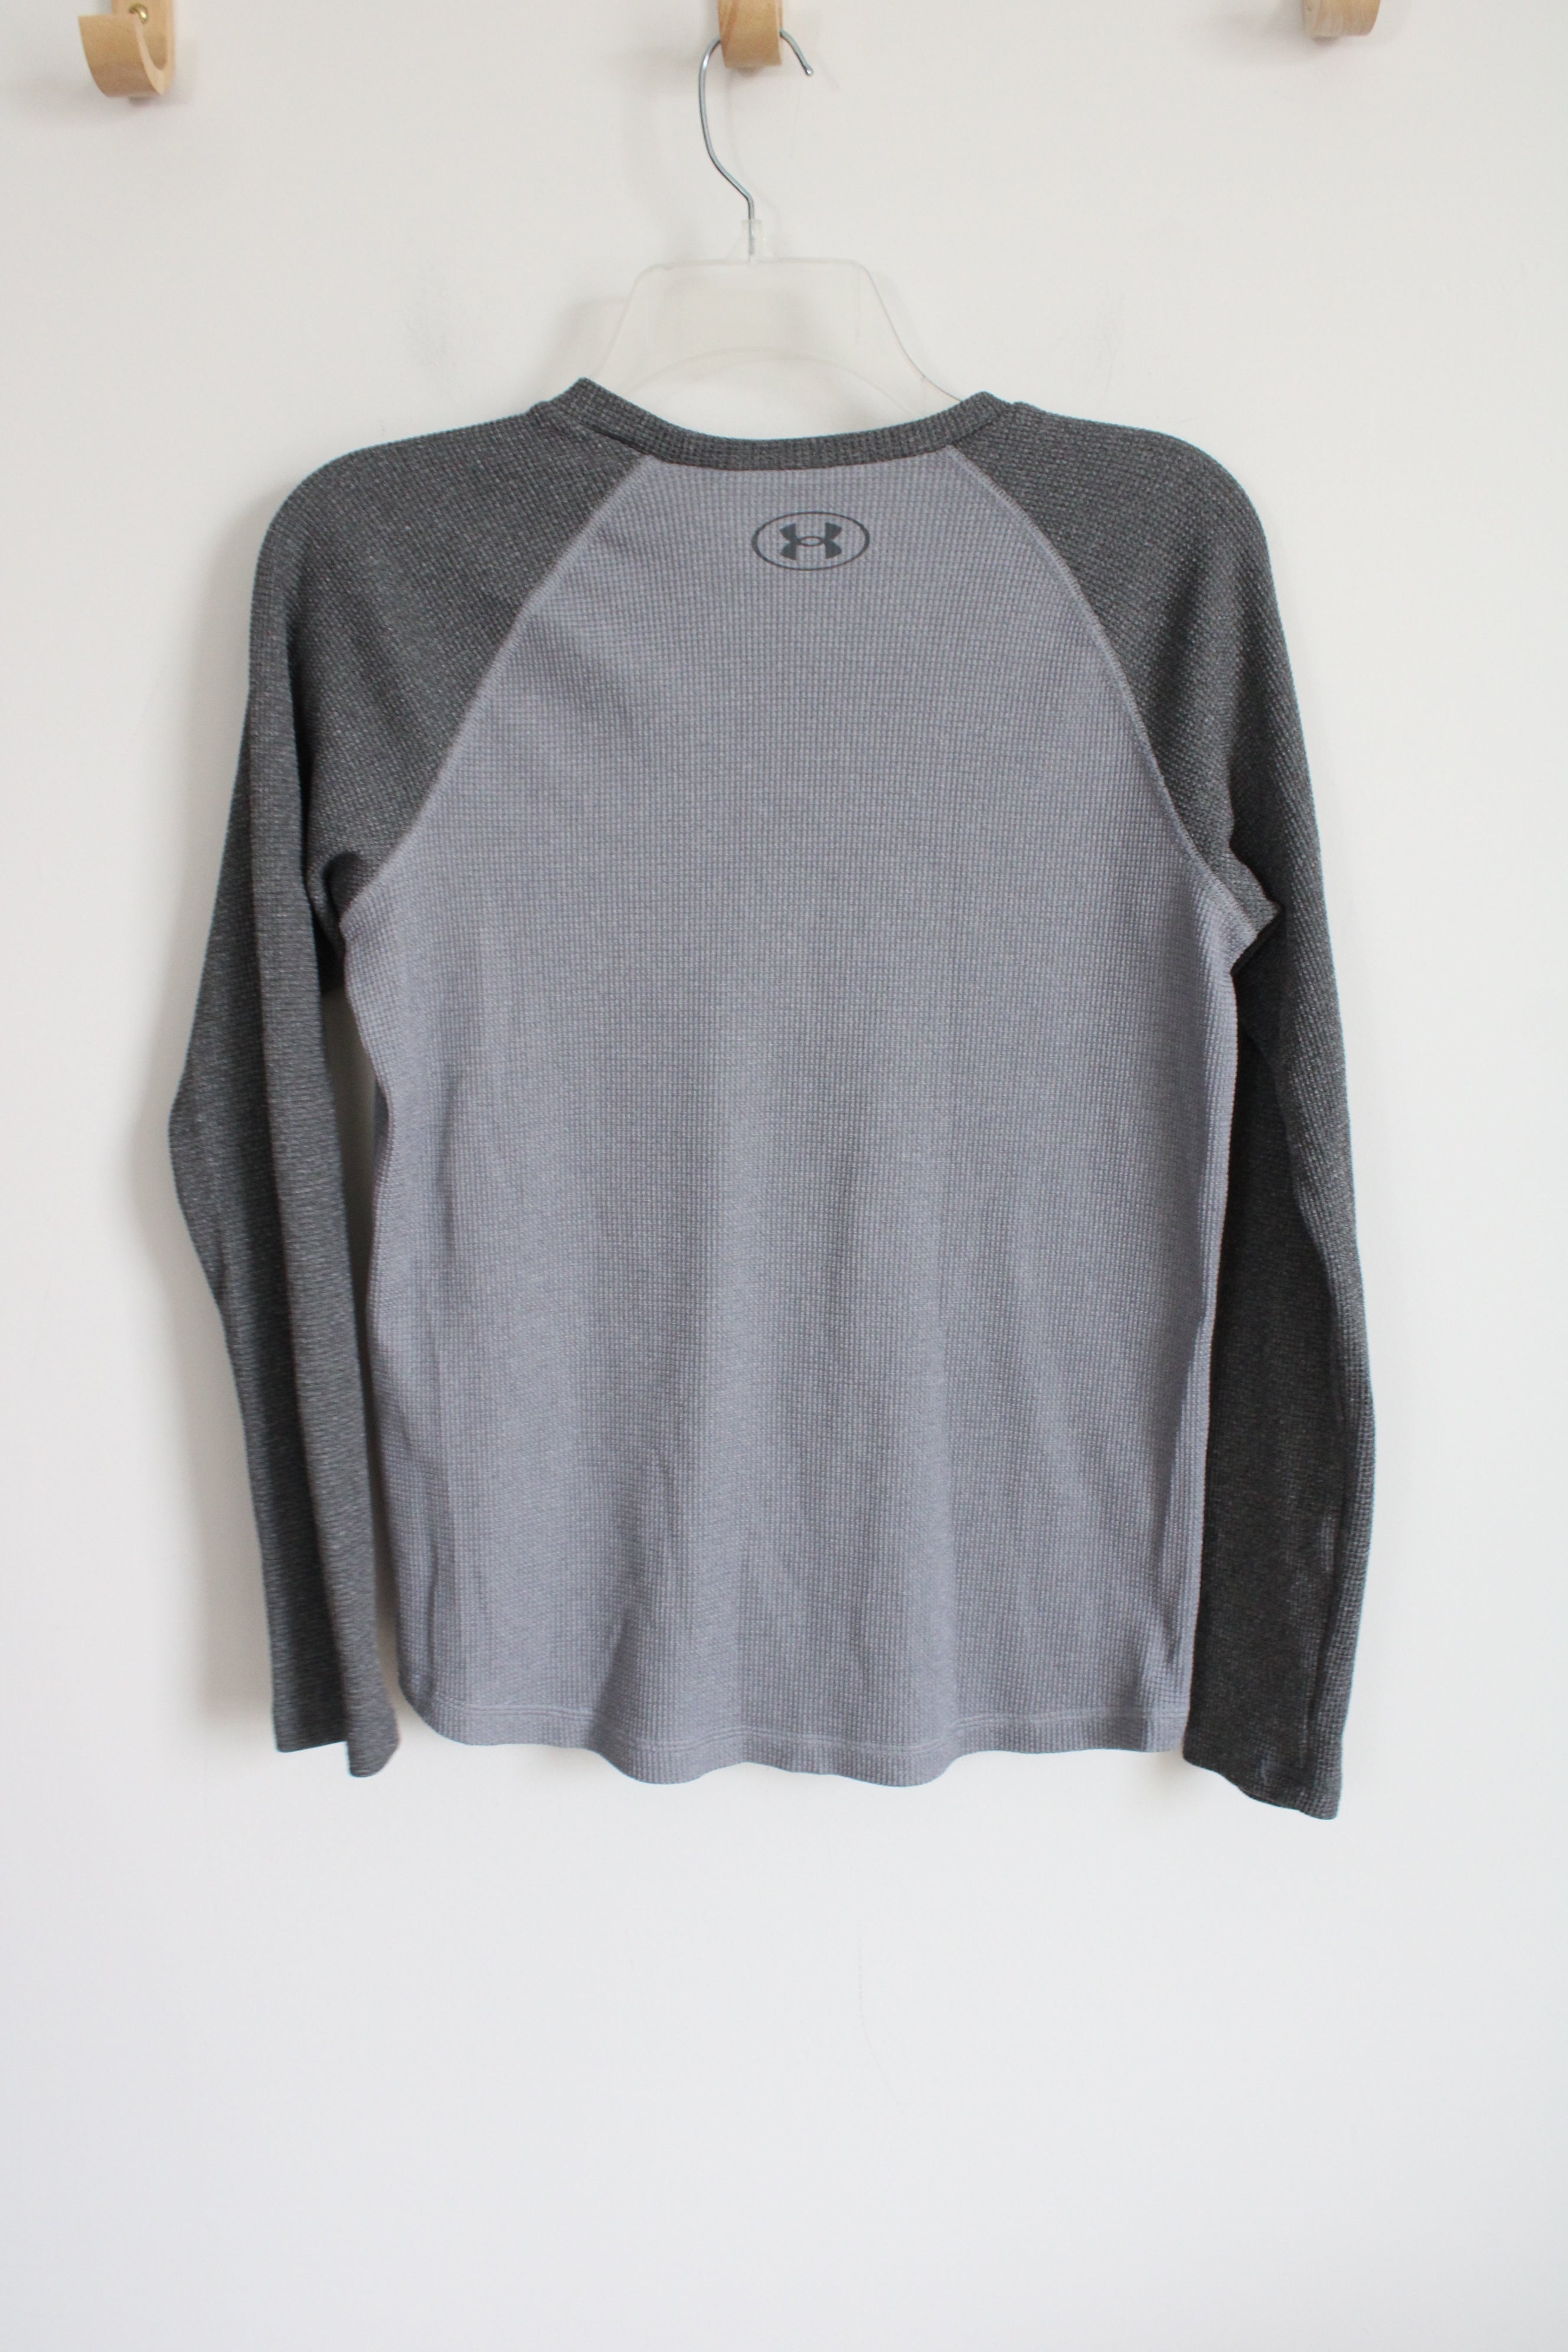 Under Armour Loose Fit Gray Waffle Knit Long Sleeved Shirt | Youth L (14/16)